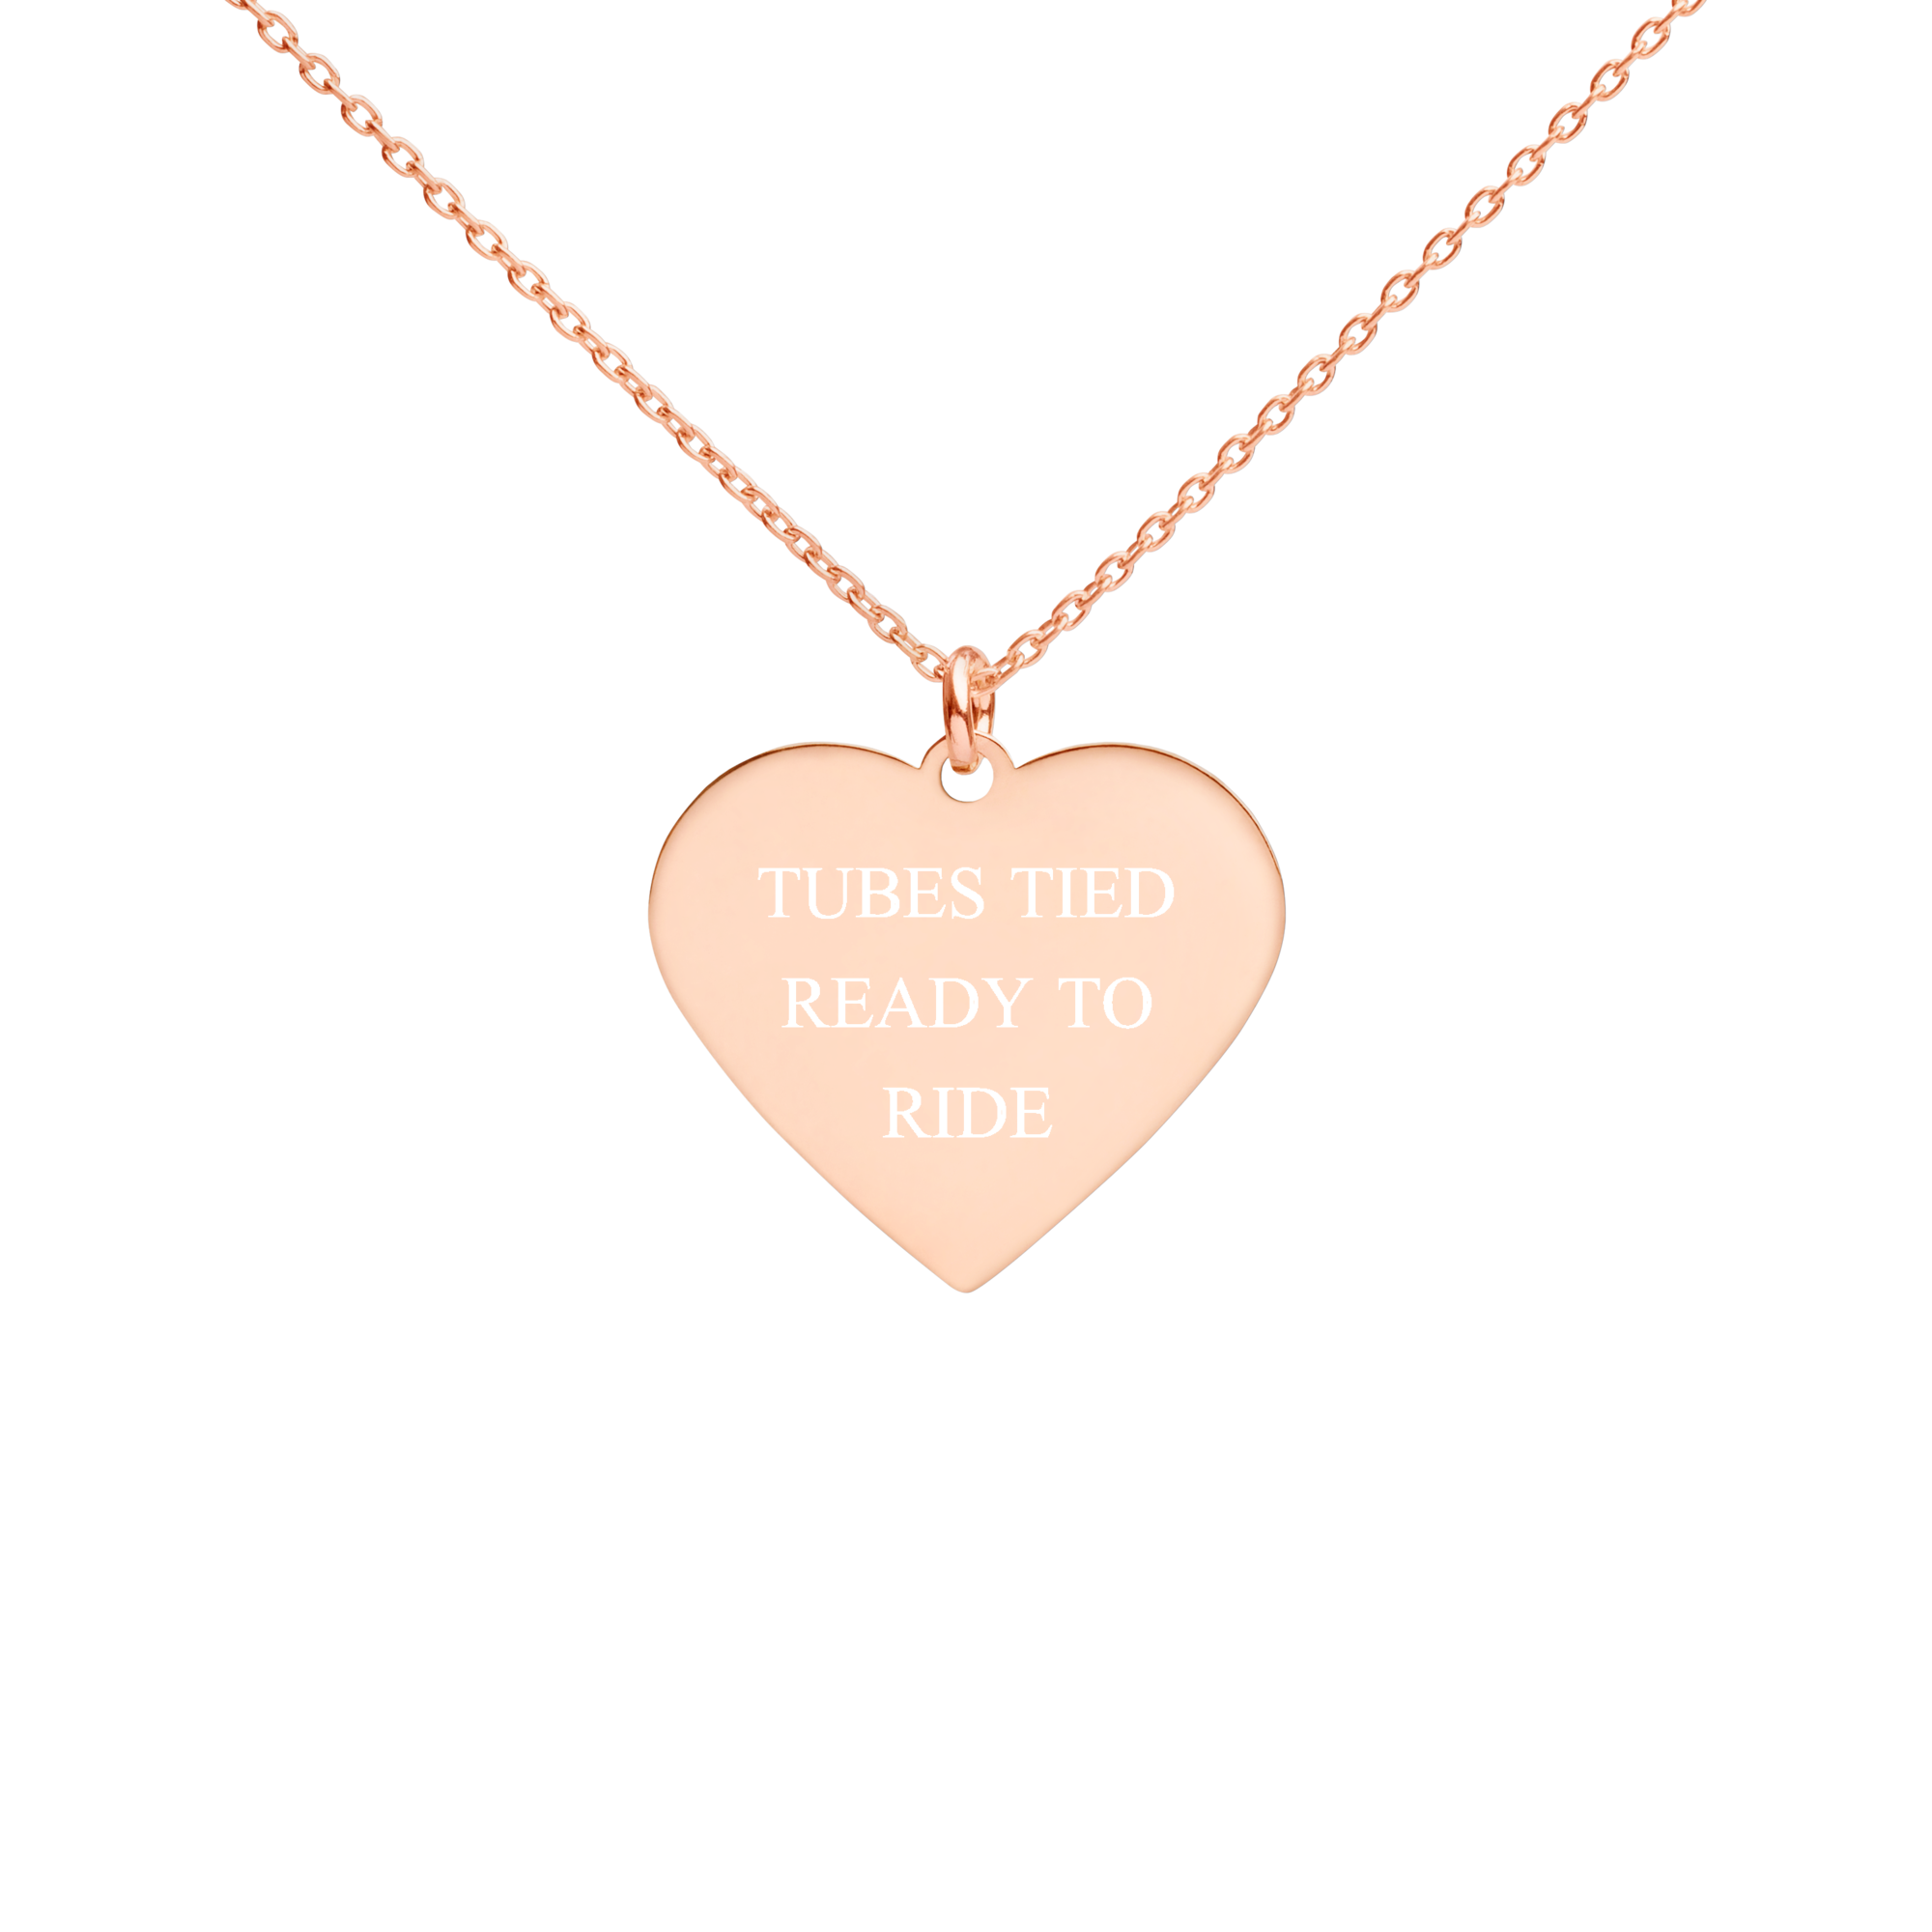 Tubes Tied Ready to Ride engraved heart necklace 24k gold